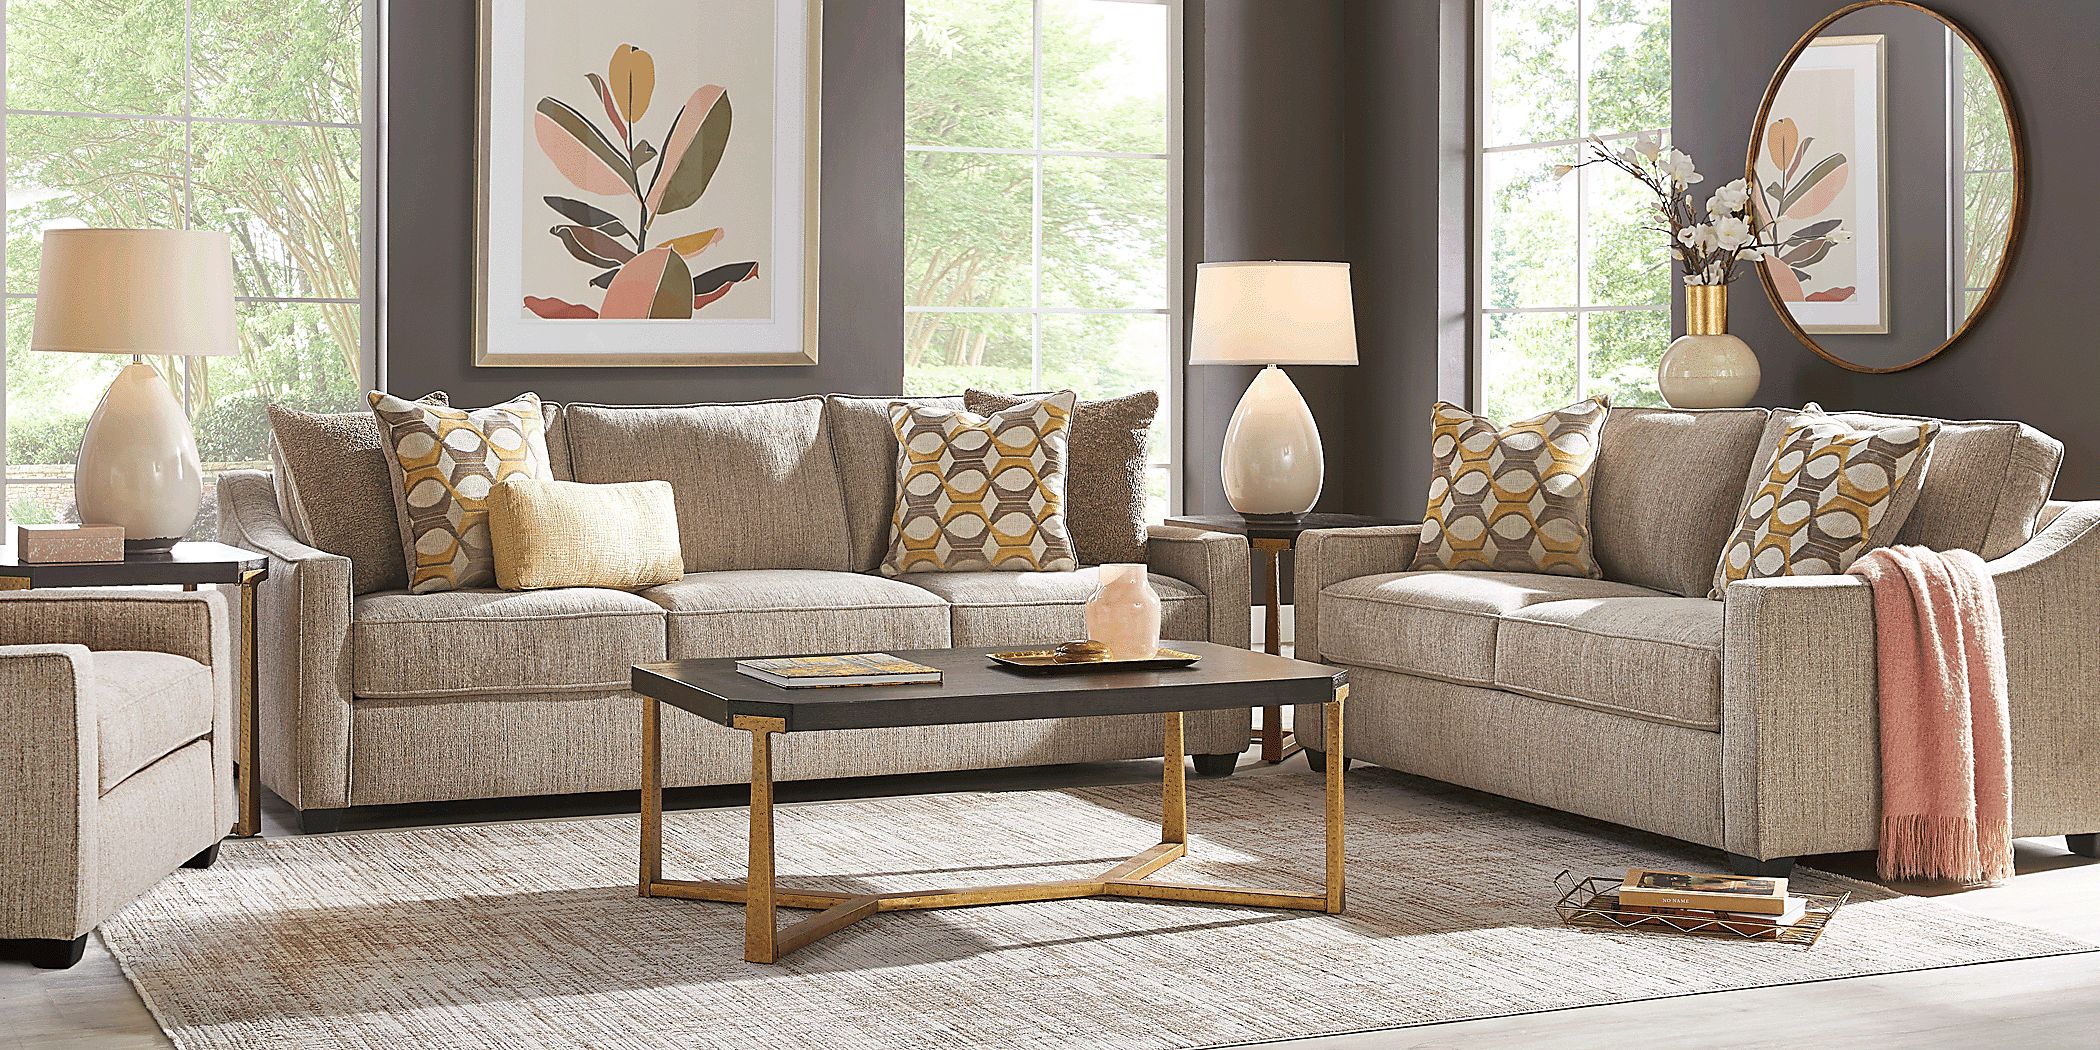 Rooms To Go Maywell Court Brown 8 Pc Living Room